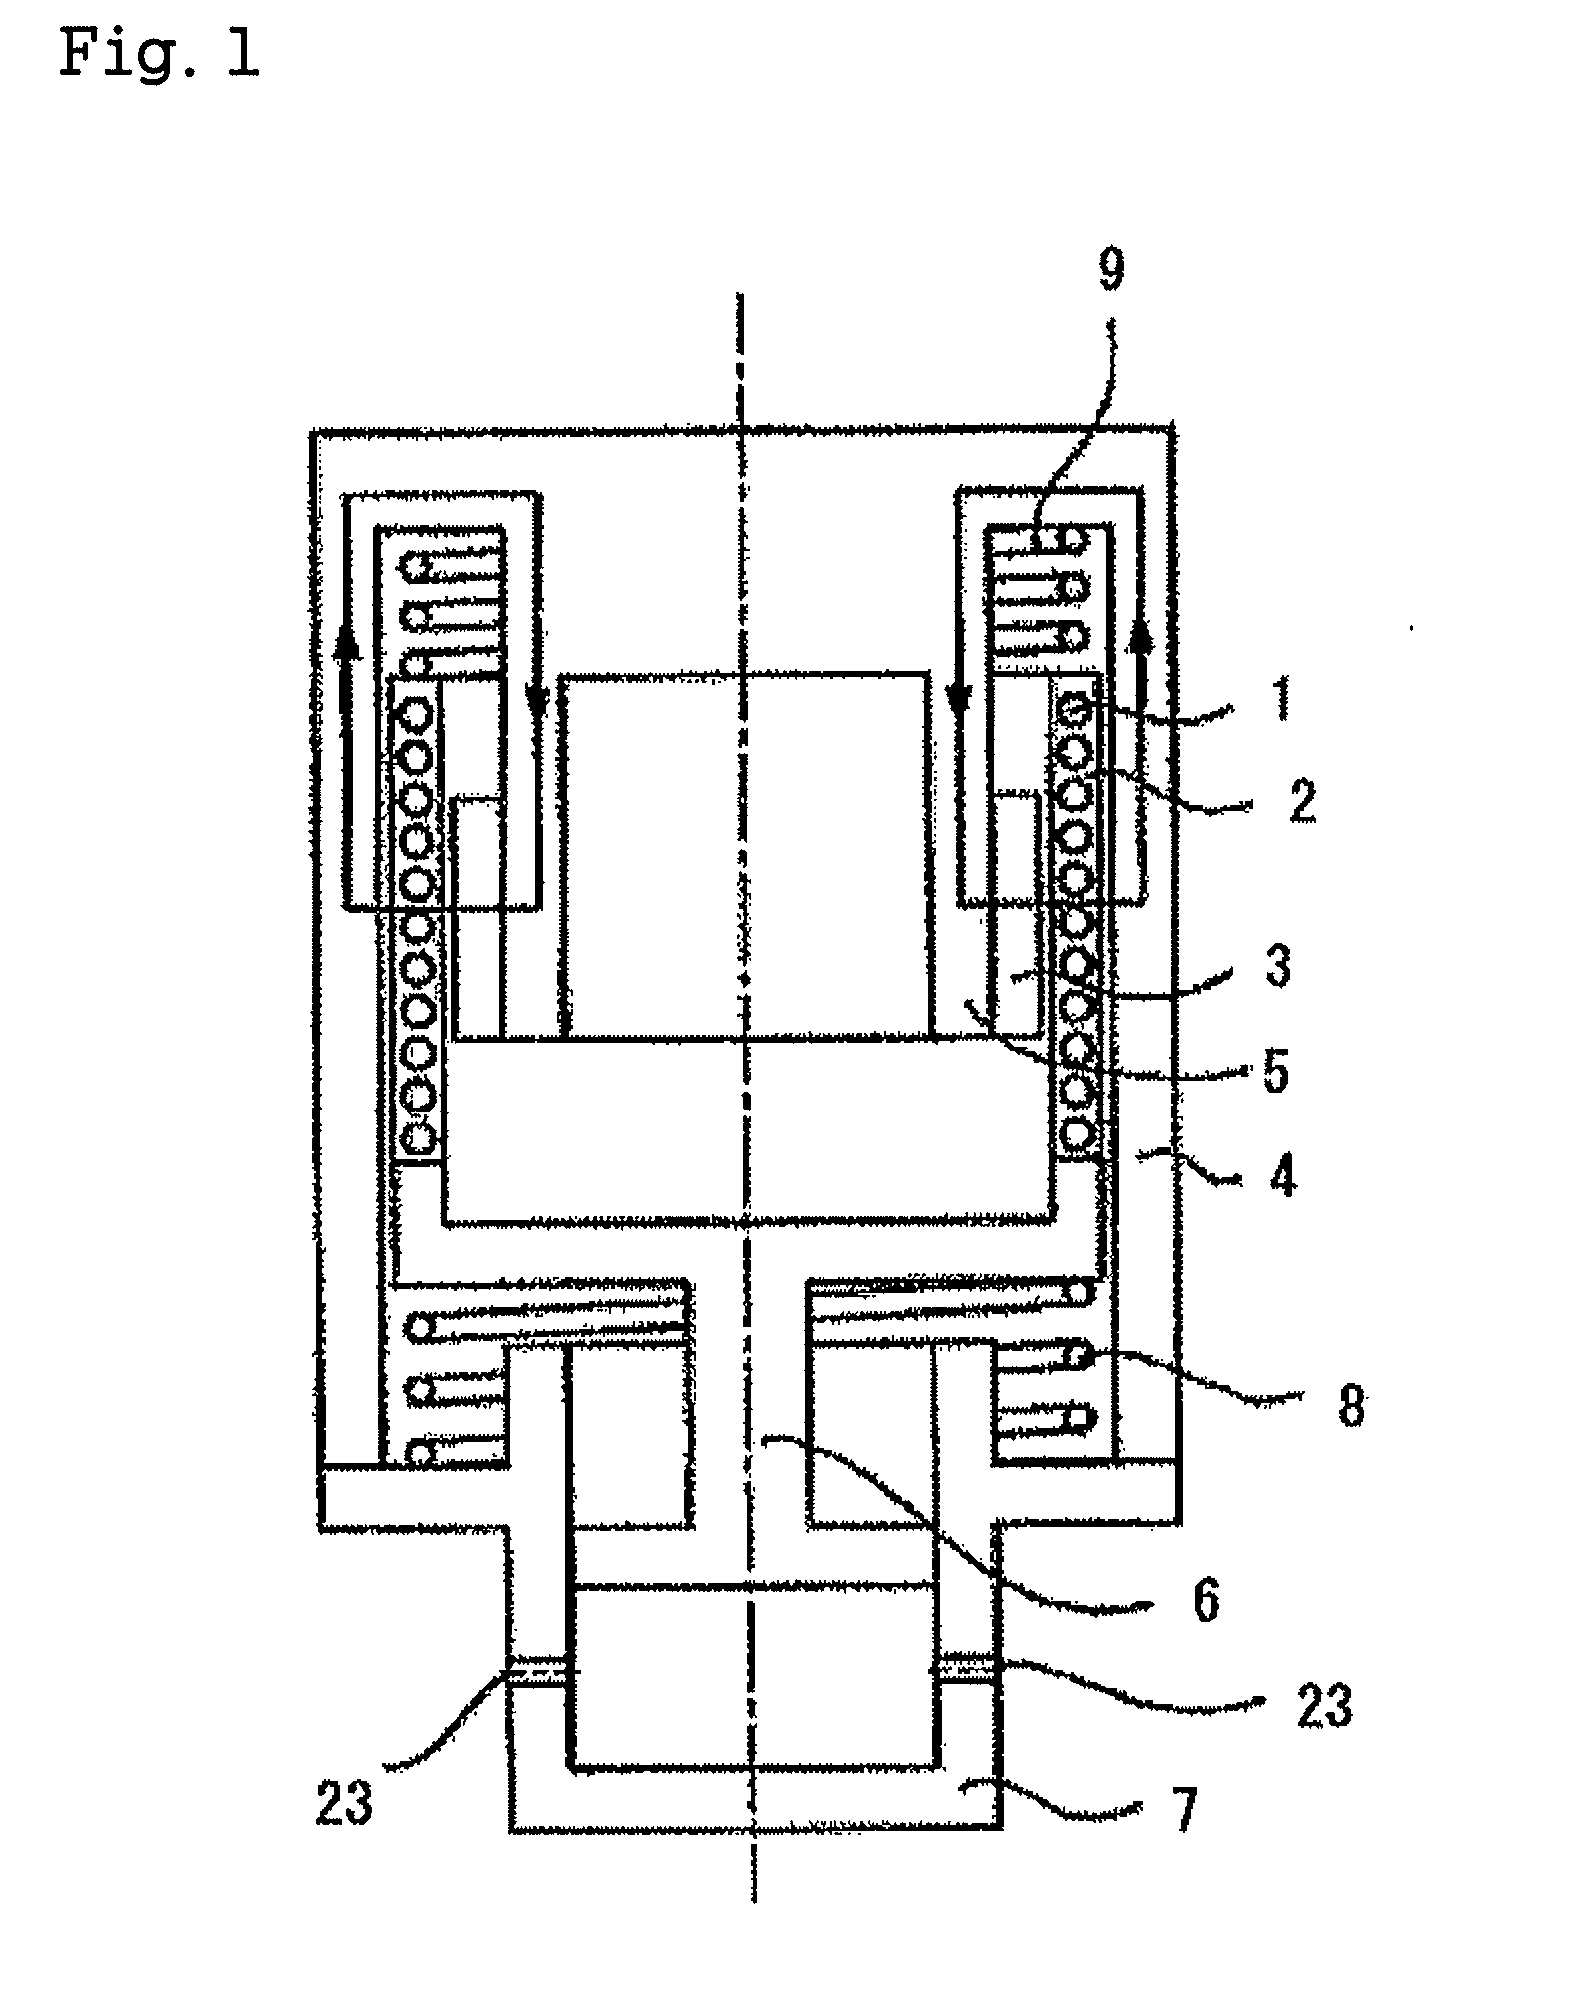 Linear motor, linear dynamo, reciprocation-type compressor driving system that is powered by linear motor, and charge system that uses linear dynamo